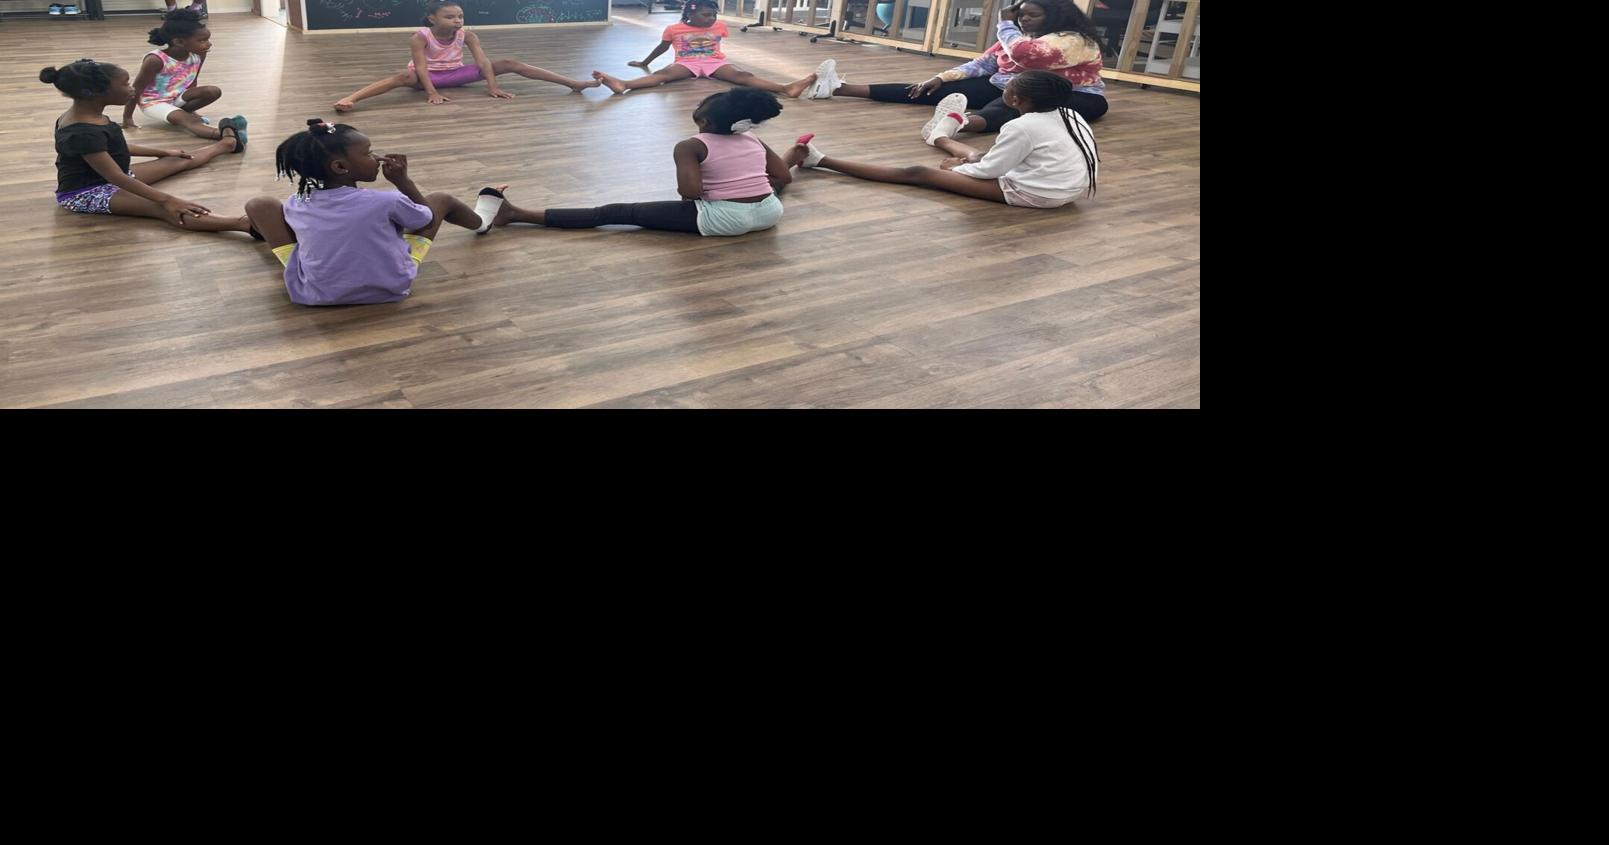 Dance therapy builds confidence in Louisiana youth | Louisiana Inspired